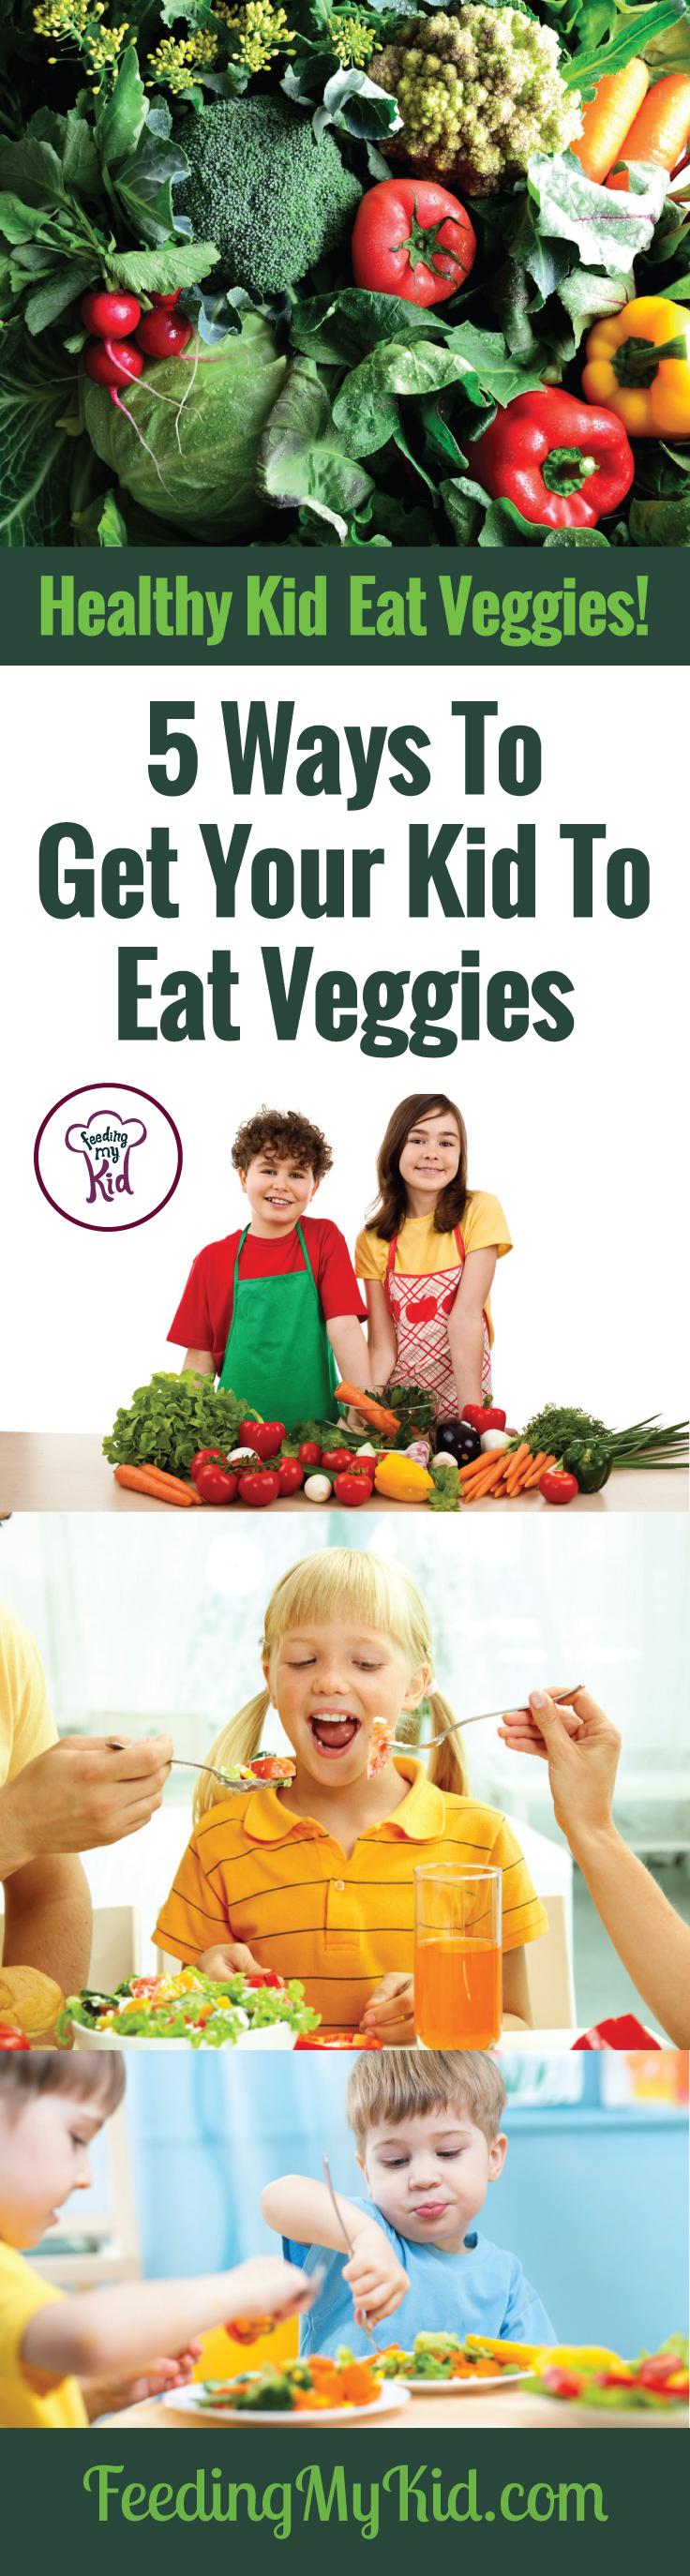 Check out these five easy ways to get kids to eat veggies. Get inspired and teach them about how cool veggies are. Create healthy kids!